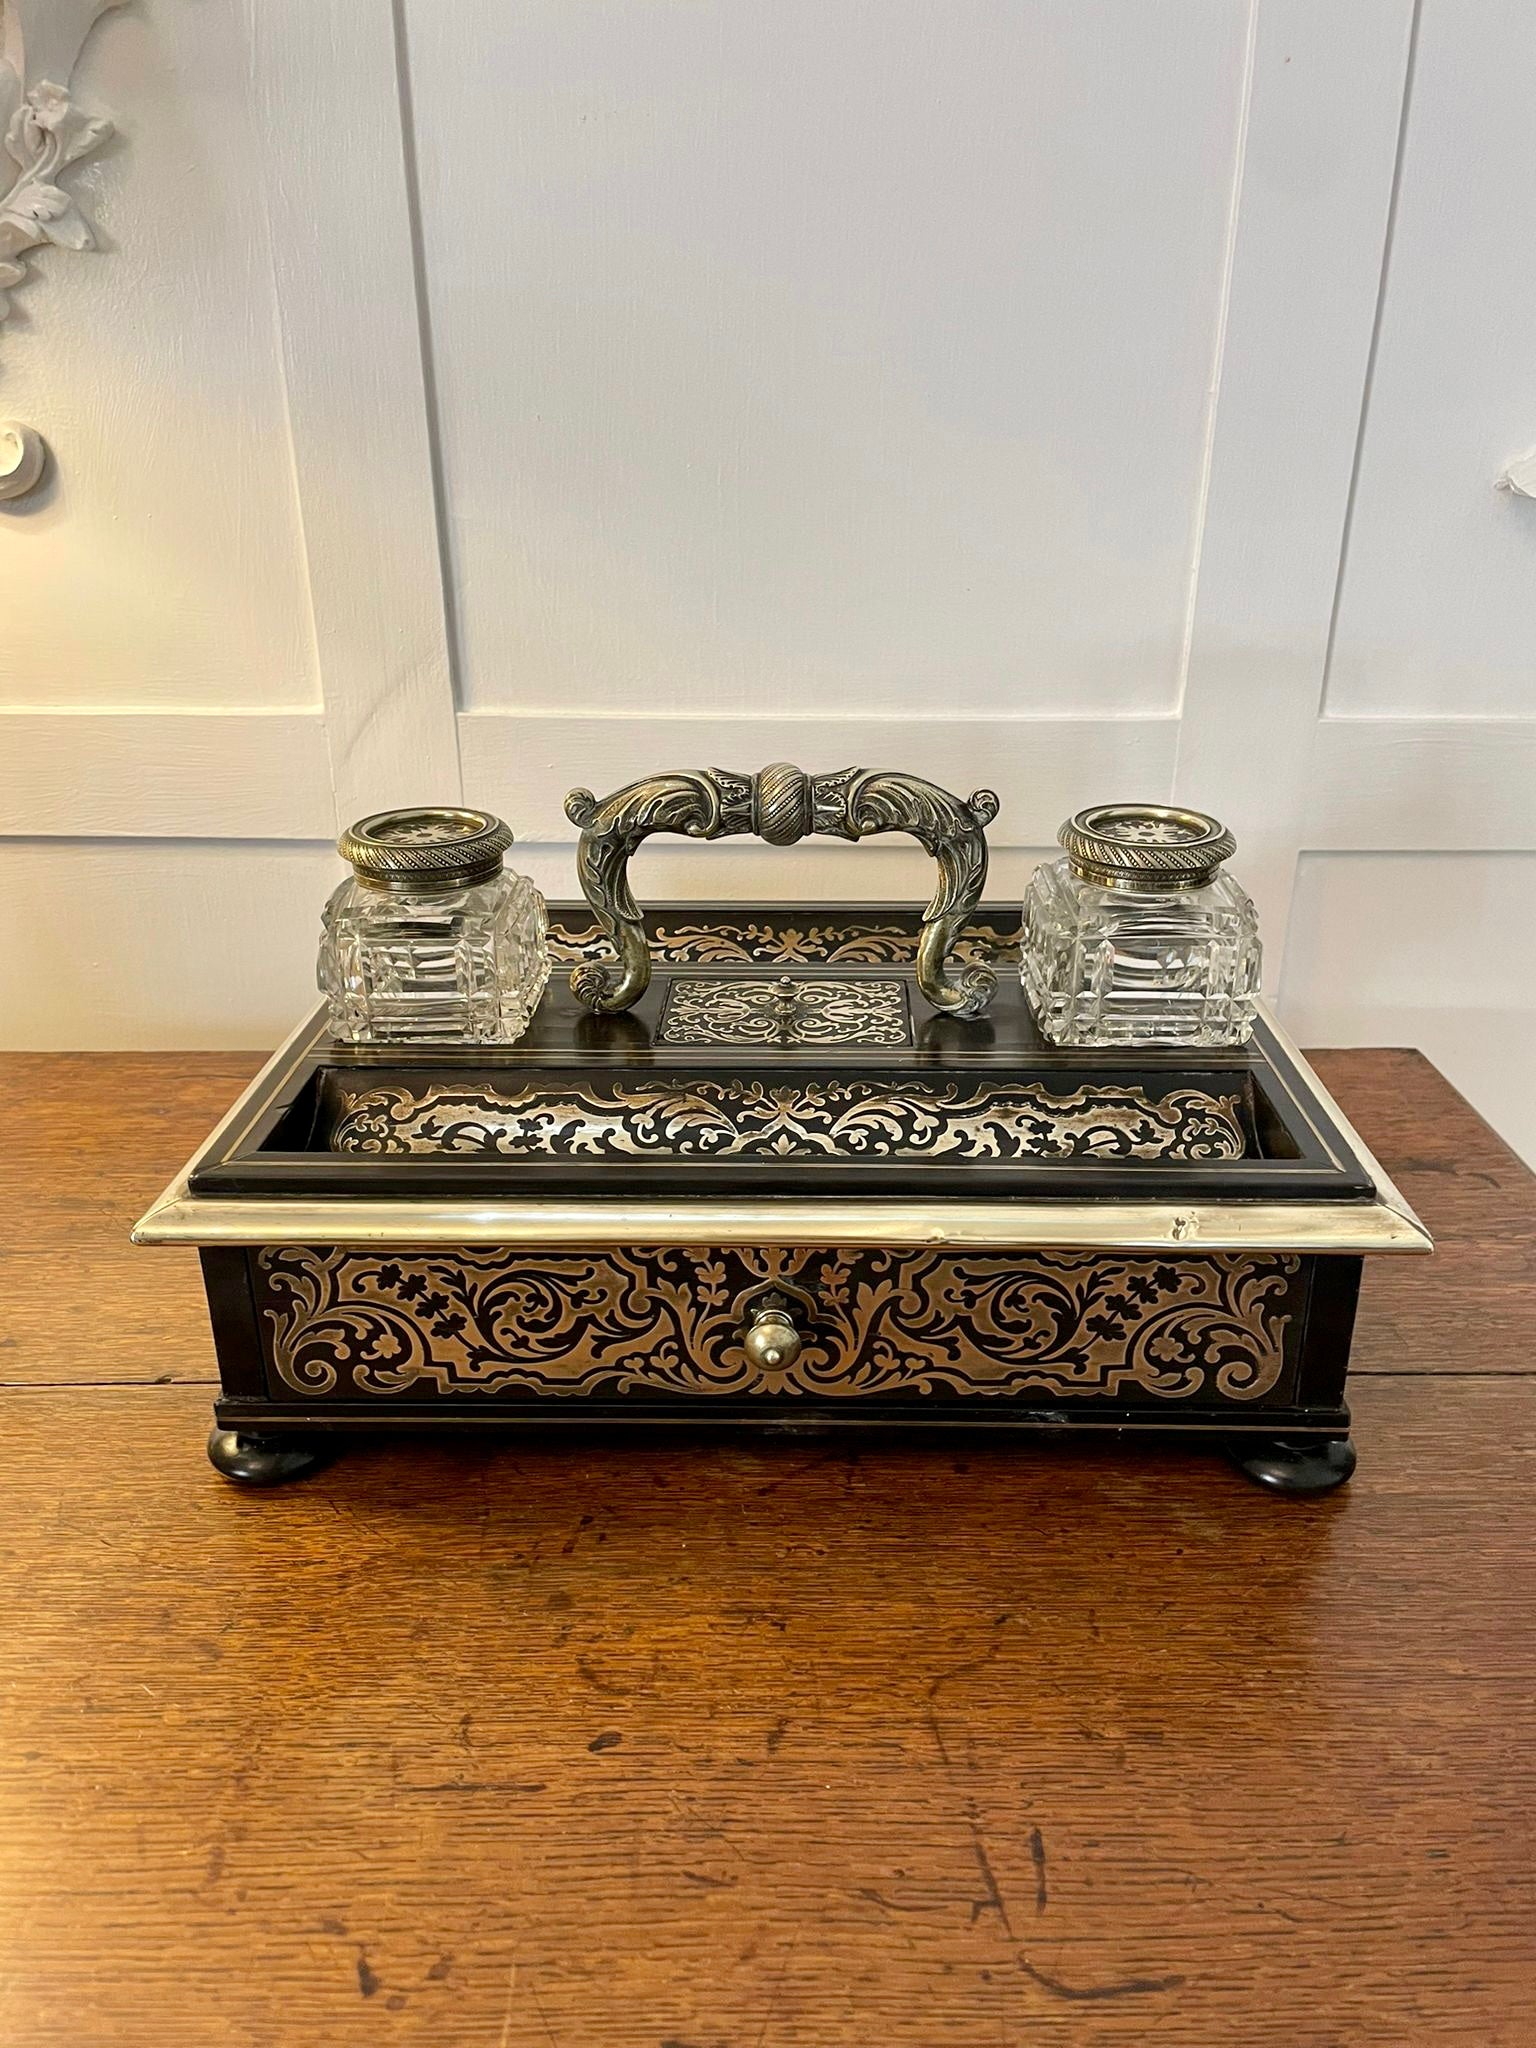 Fine quality antique Victorian French freestanding inlaid boulle desk set having a quality ornate shaped brass handle flanked by a pair of original cut glass inkwells with inlaid boulle tops above two inlaid boulle pen trays, one long drawer with